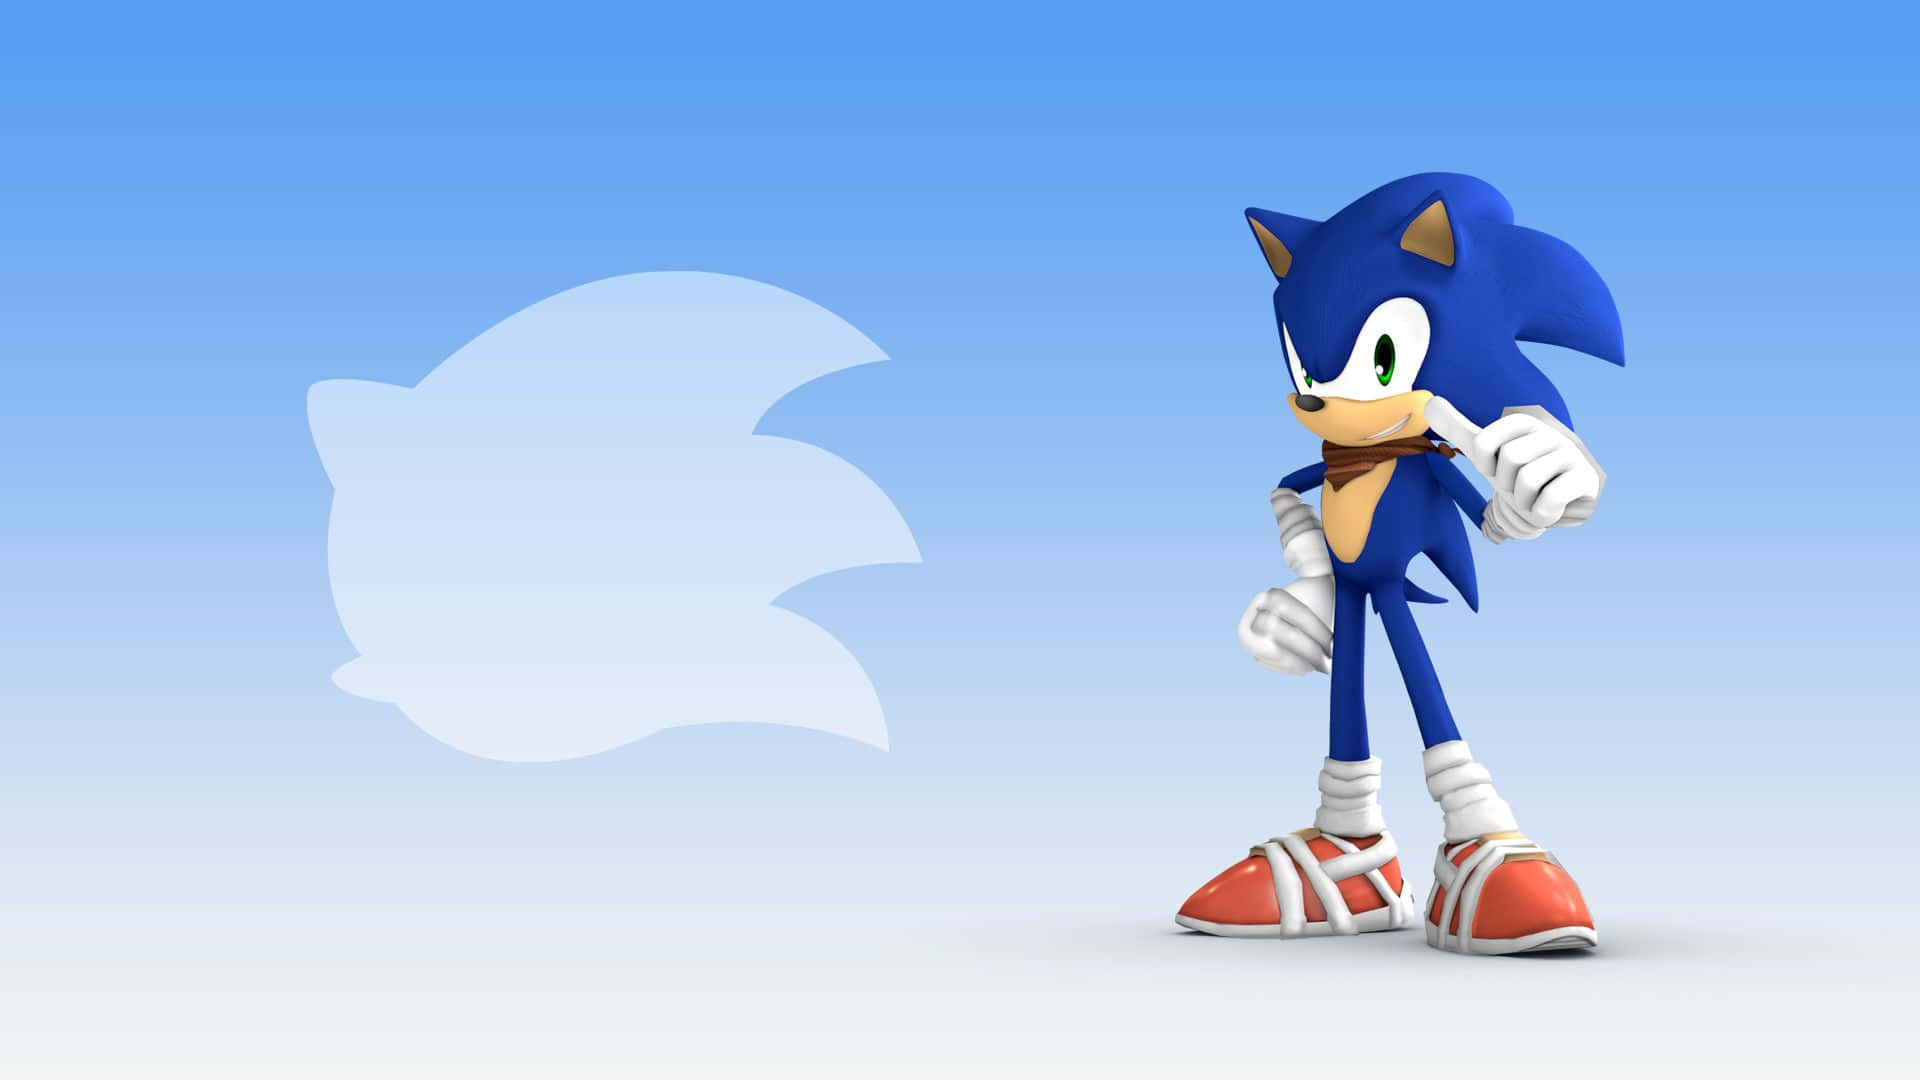 Sonic and friends in an action-packed scene Wallpaper